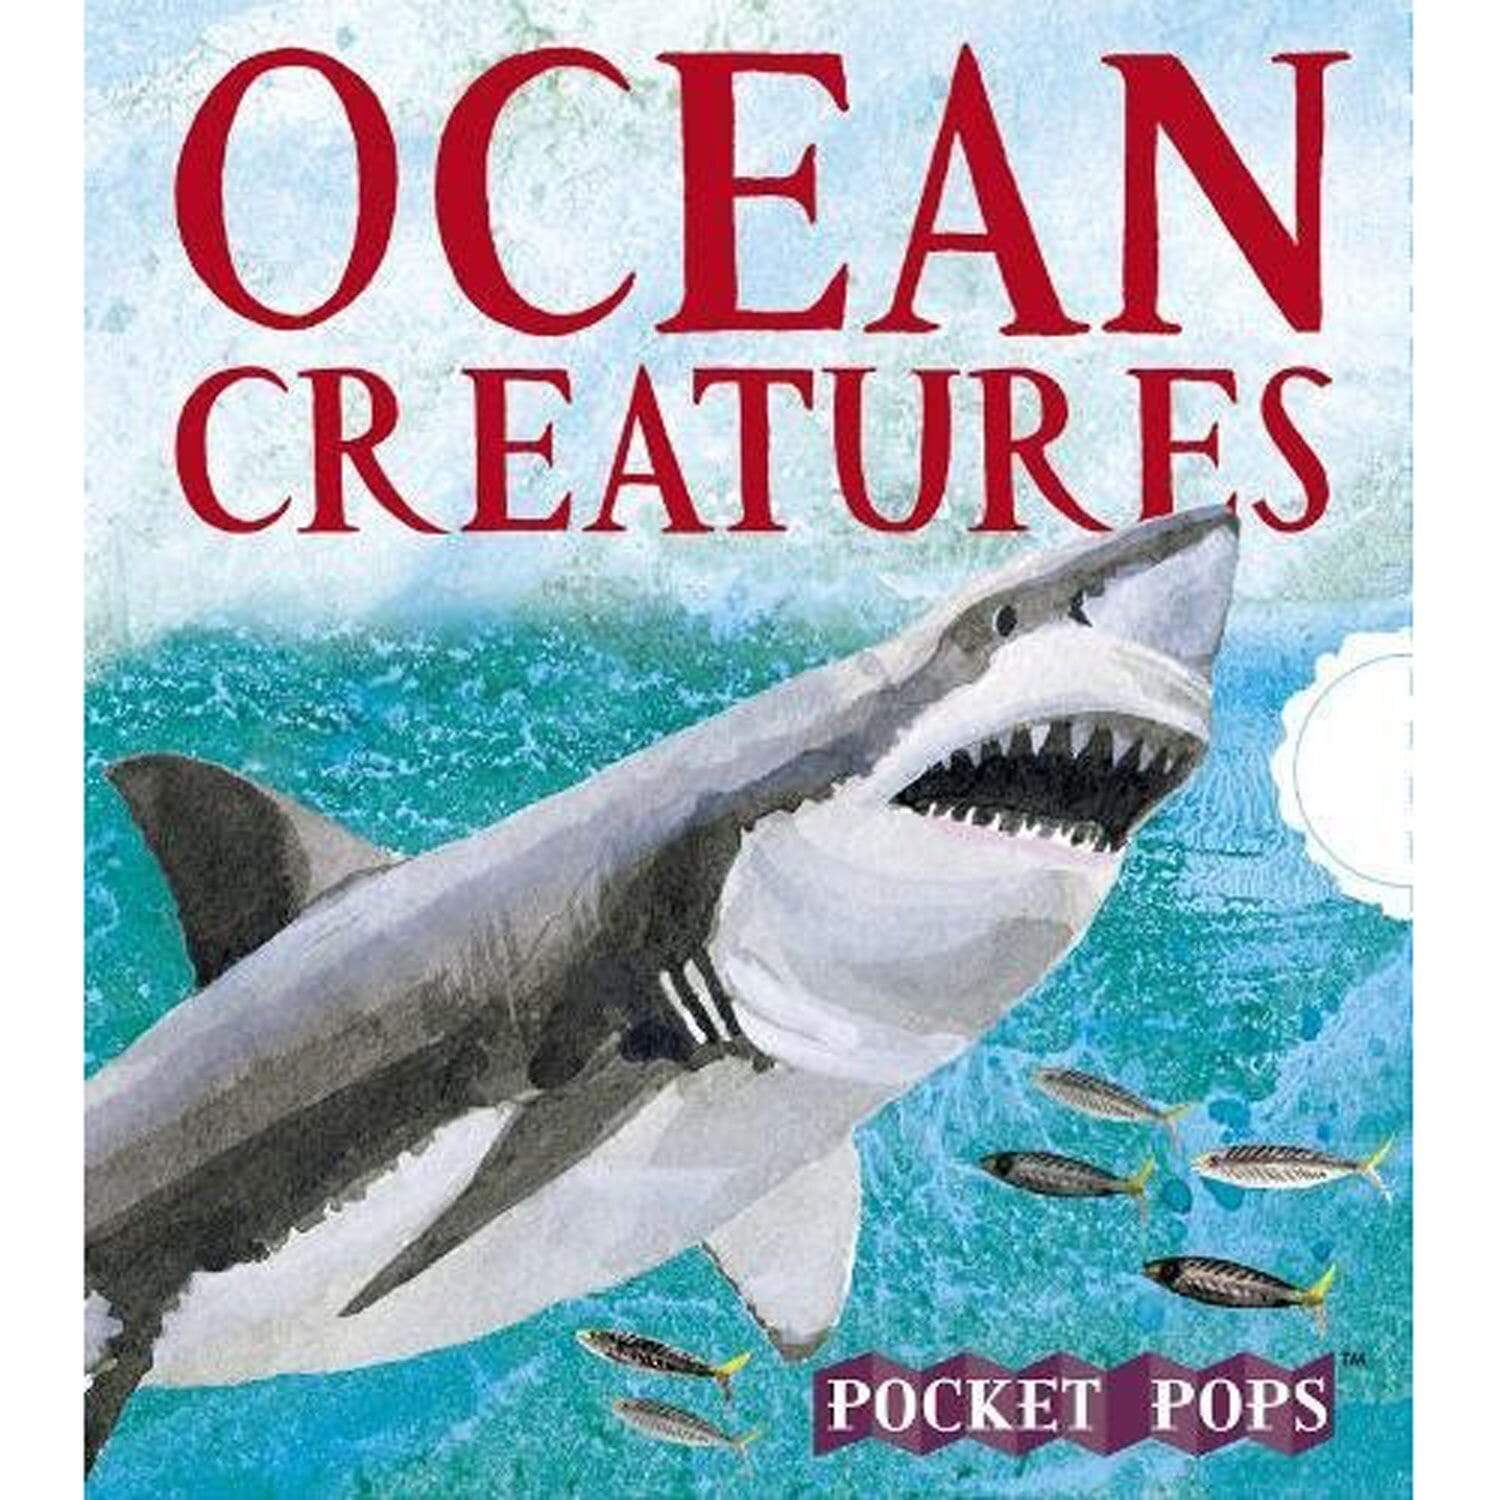 Ocean Creatures: A Three-Dimensional Expanding Pocket Guide